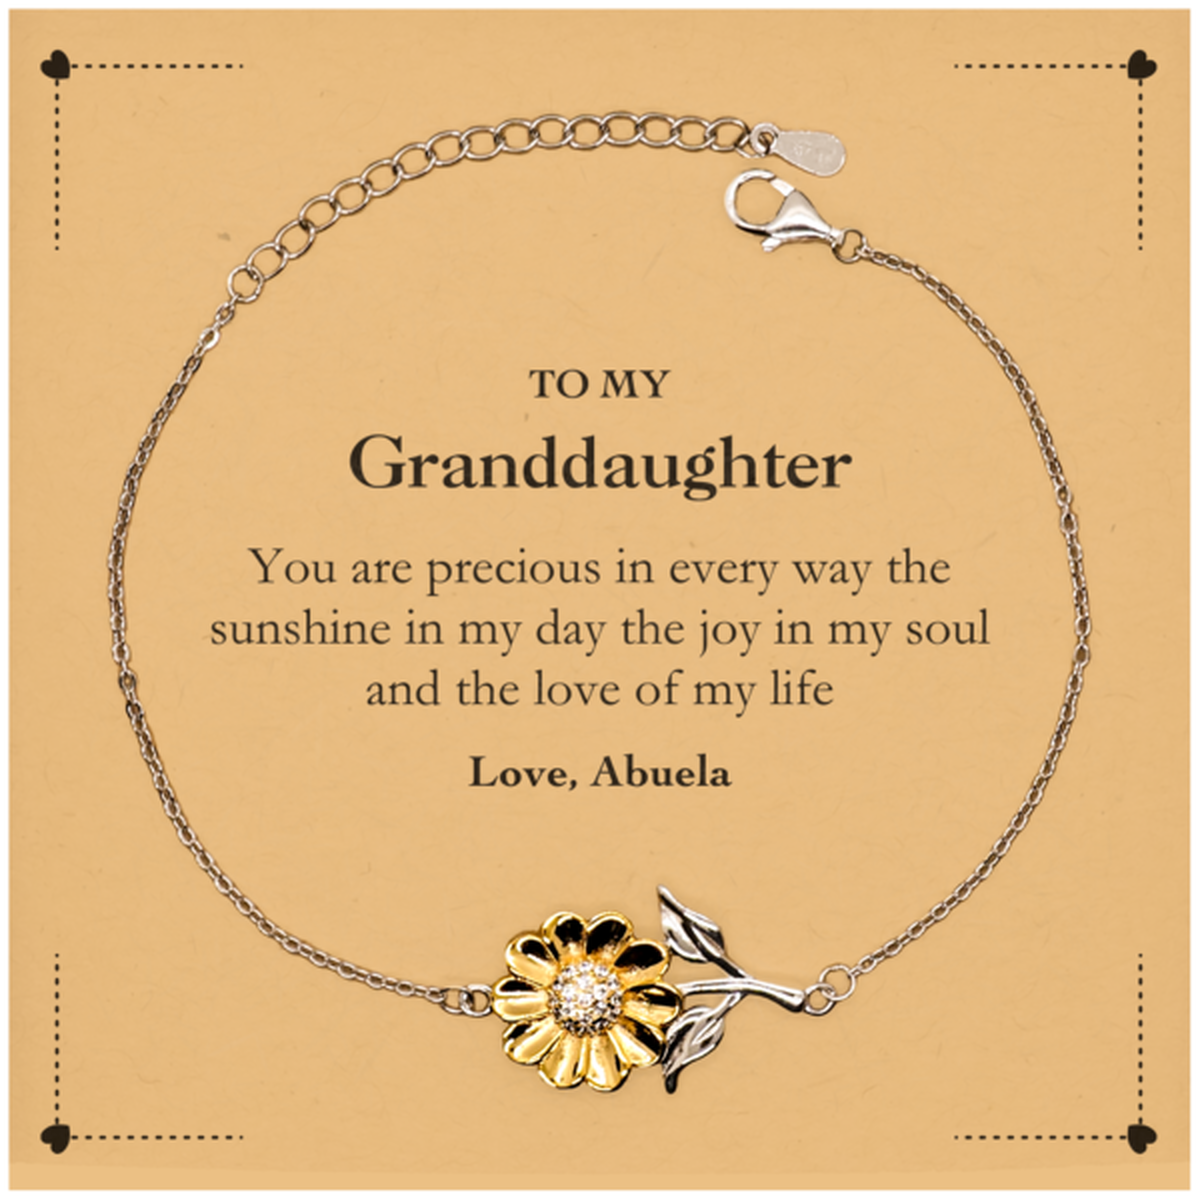 Graduation Gifts for Granddaughter Sunflower Bracelet Present from Abuela, Christmas Granddaughter Birthday Gifts Granddaughter You are precious in every way the sunshine in my day. Love, Abuela